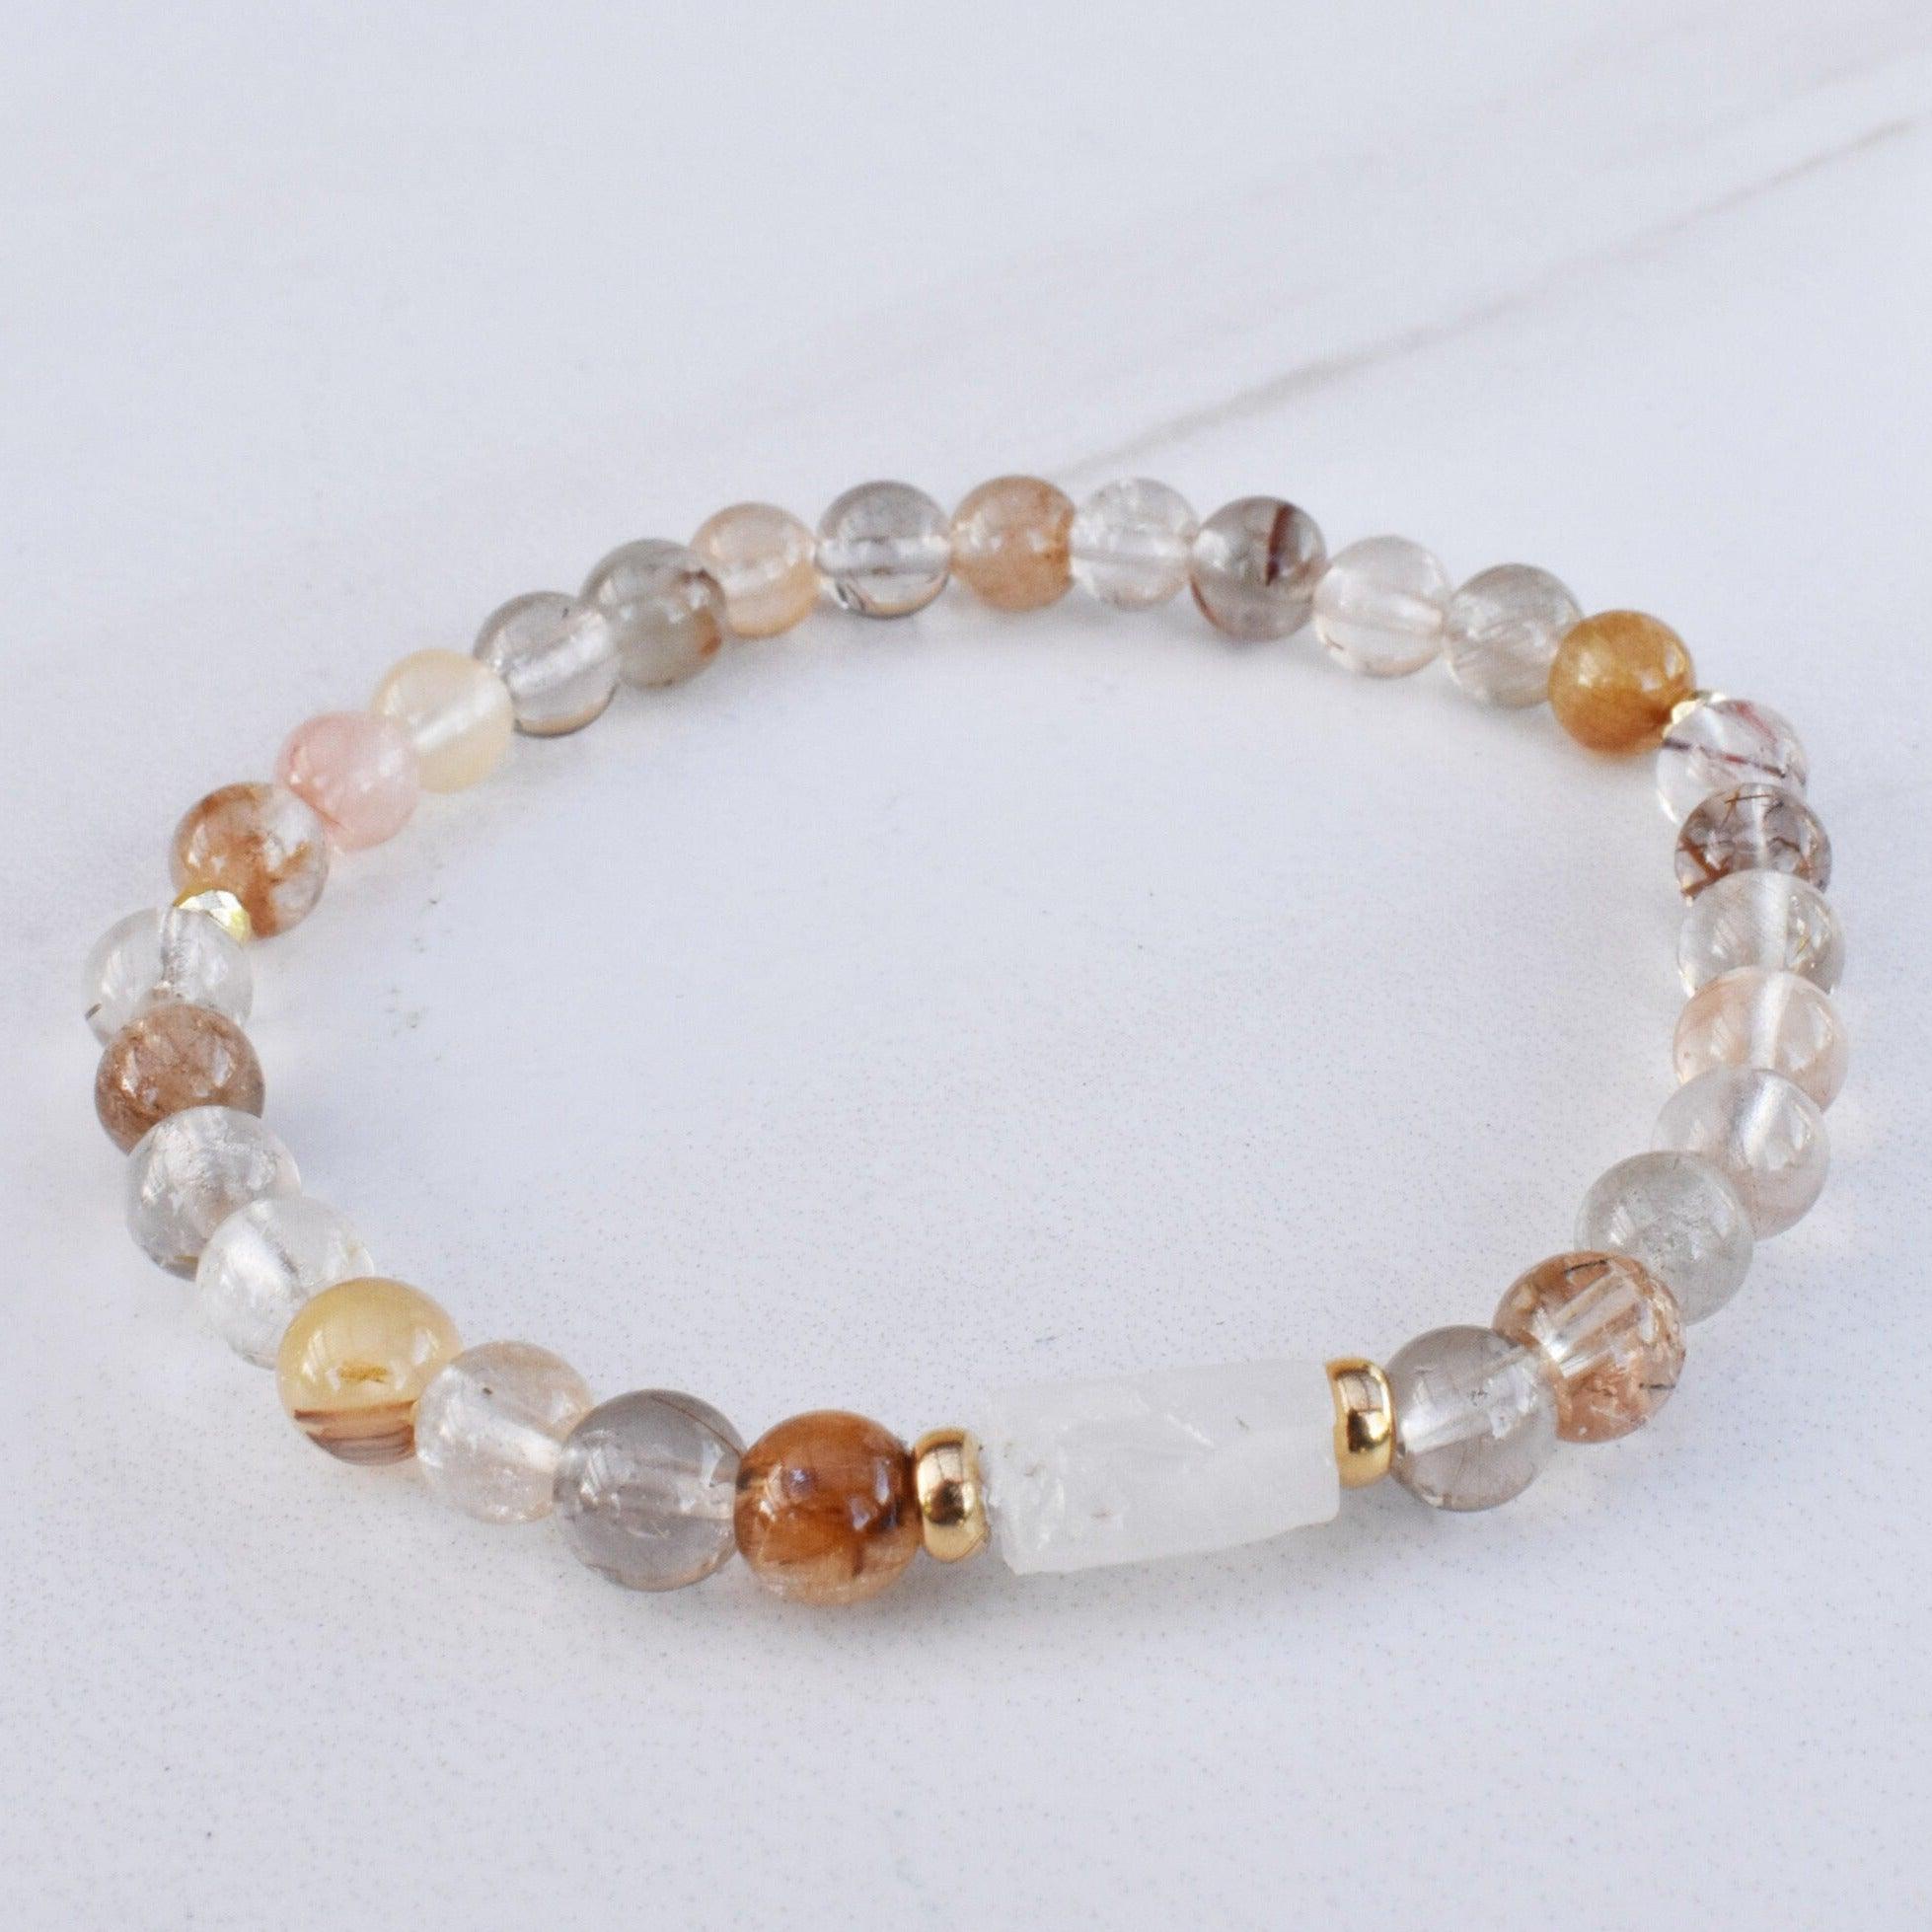 Rutilated Quartz and Moonstone healing Gemstone bracelet to help you manifest your dreams and make them a reality.